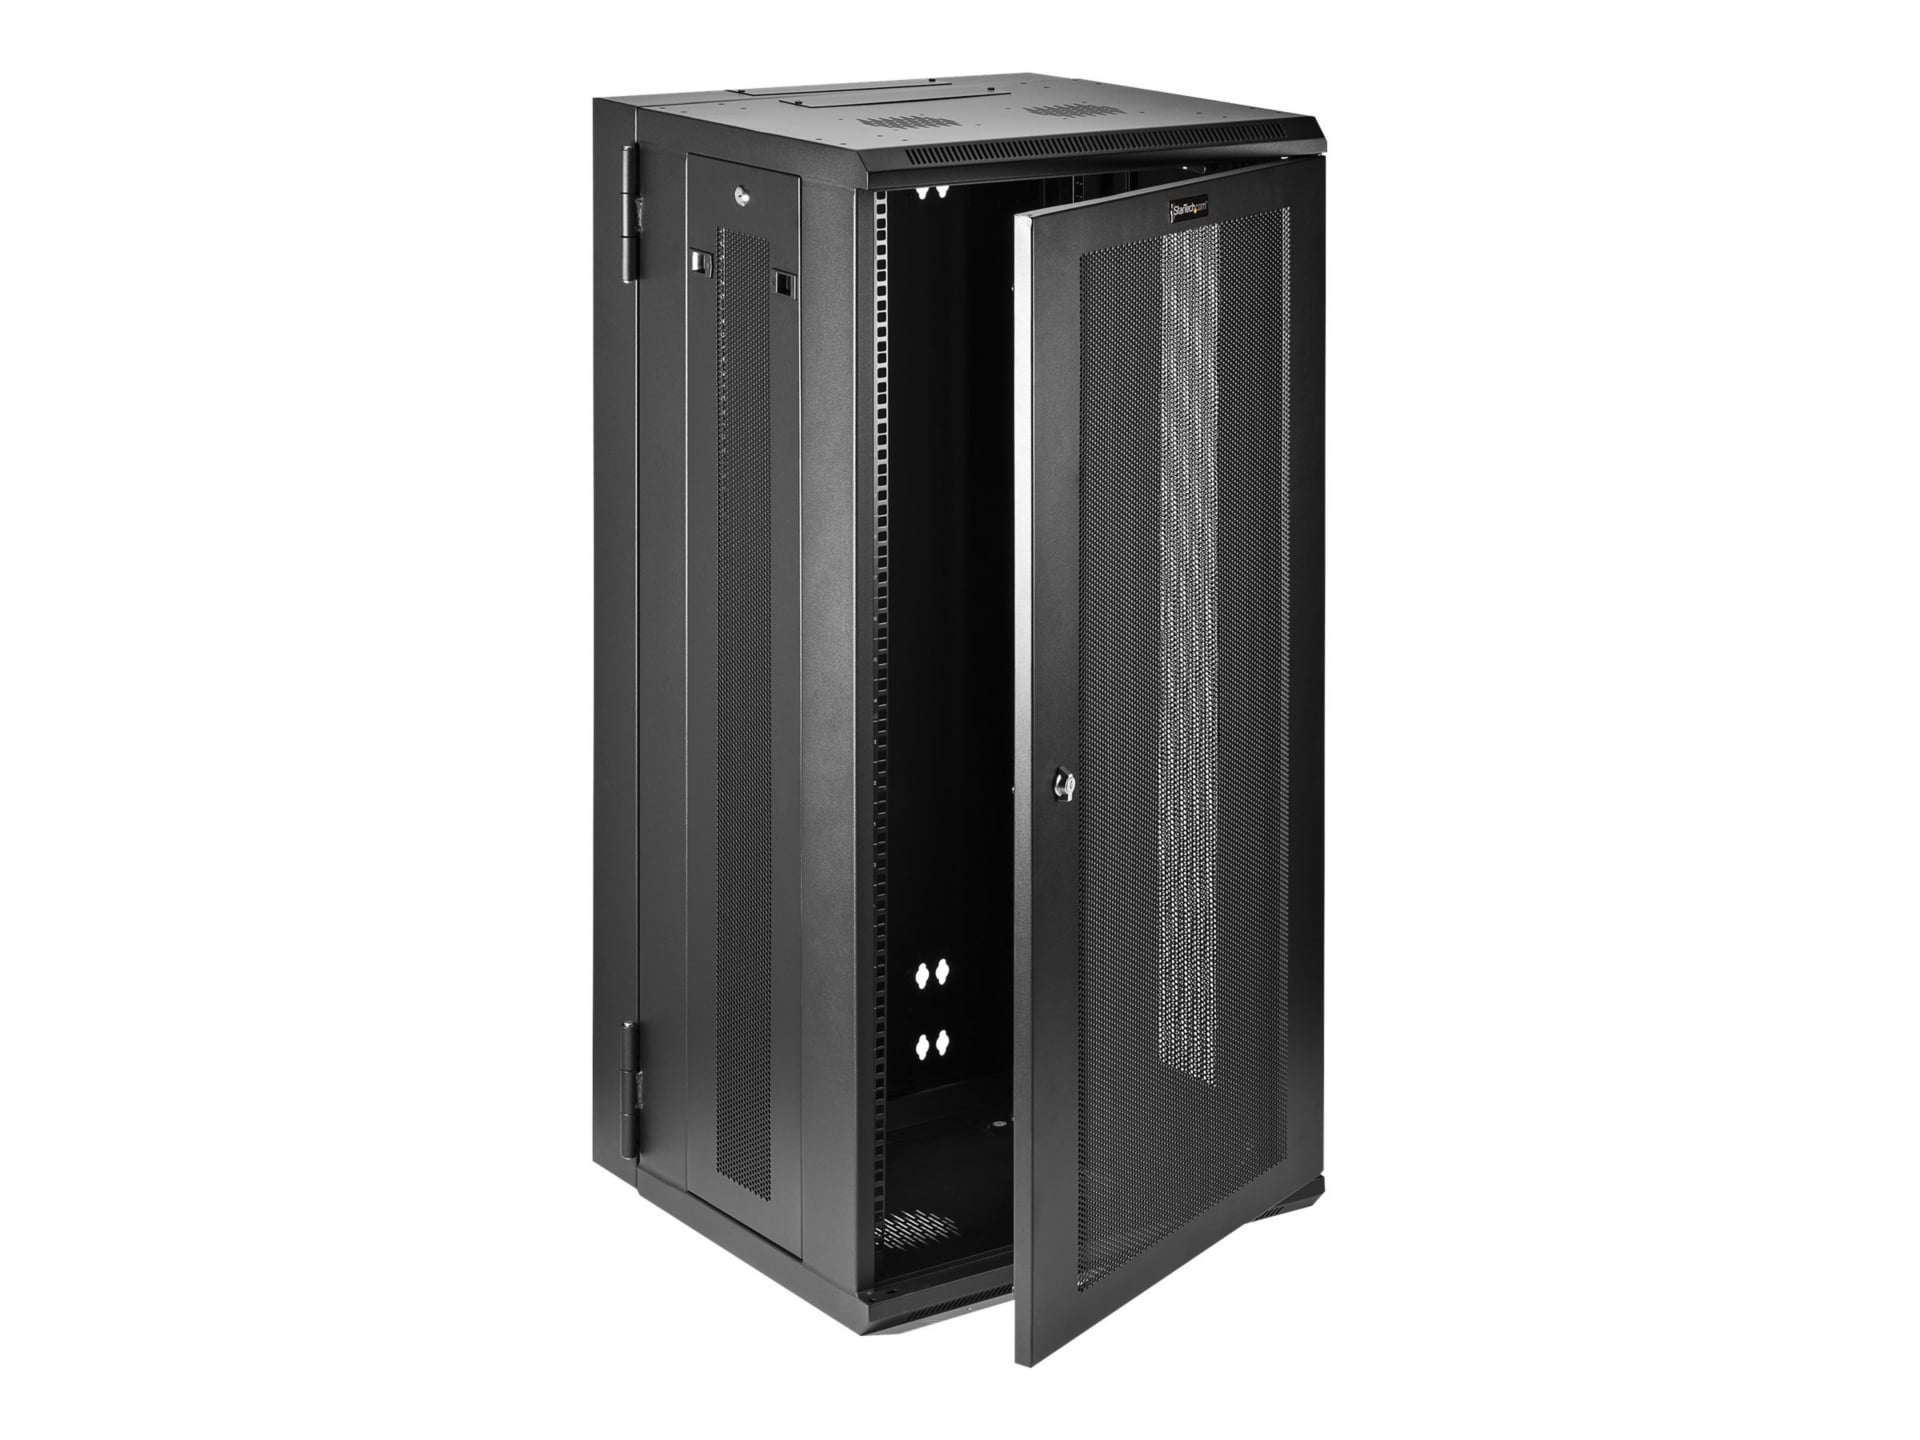 StarTech.com 4-Post 26U Wall Mount Network Cabinet, 19" Hinged Wall-Mounted Server Rack Enclosure for IT Equipment